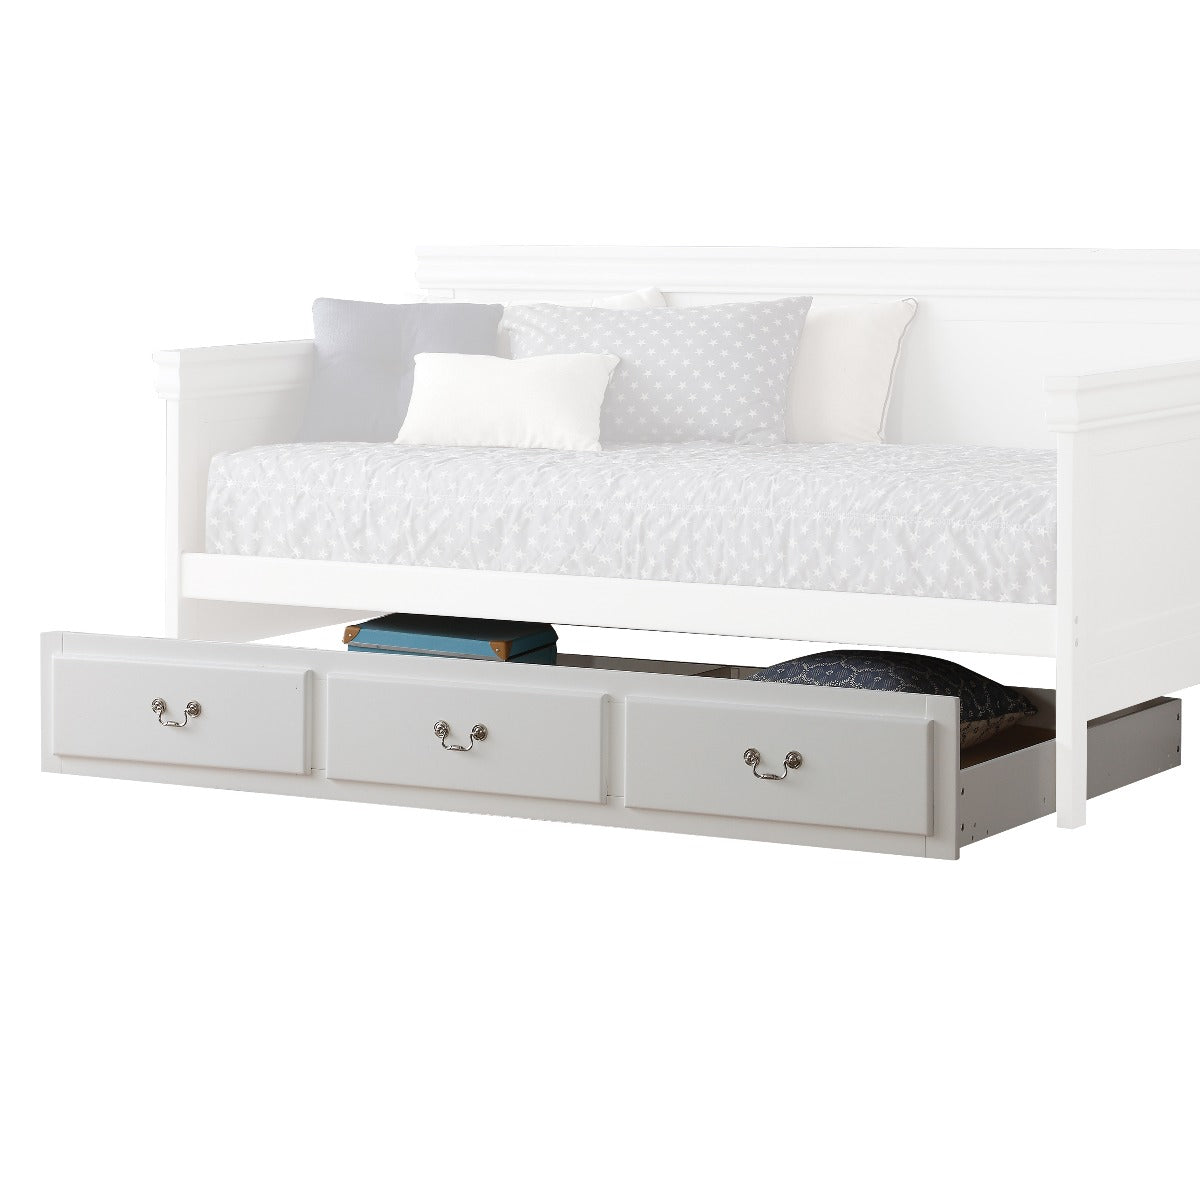 ACME Furniture Trundle - Bailee Trundle (Twin), White (39102)